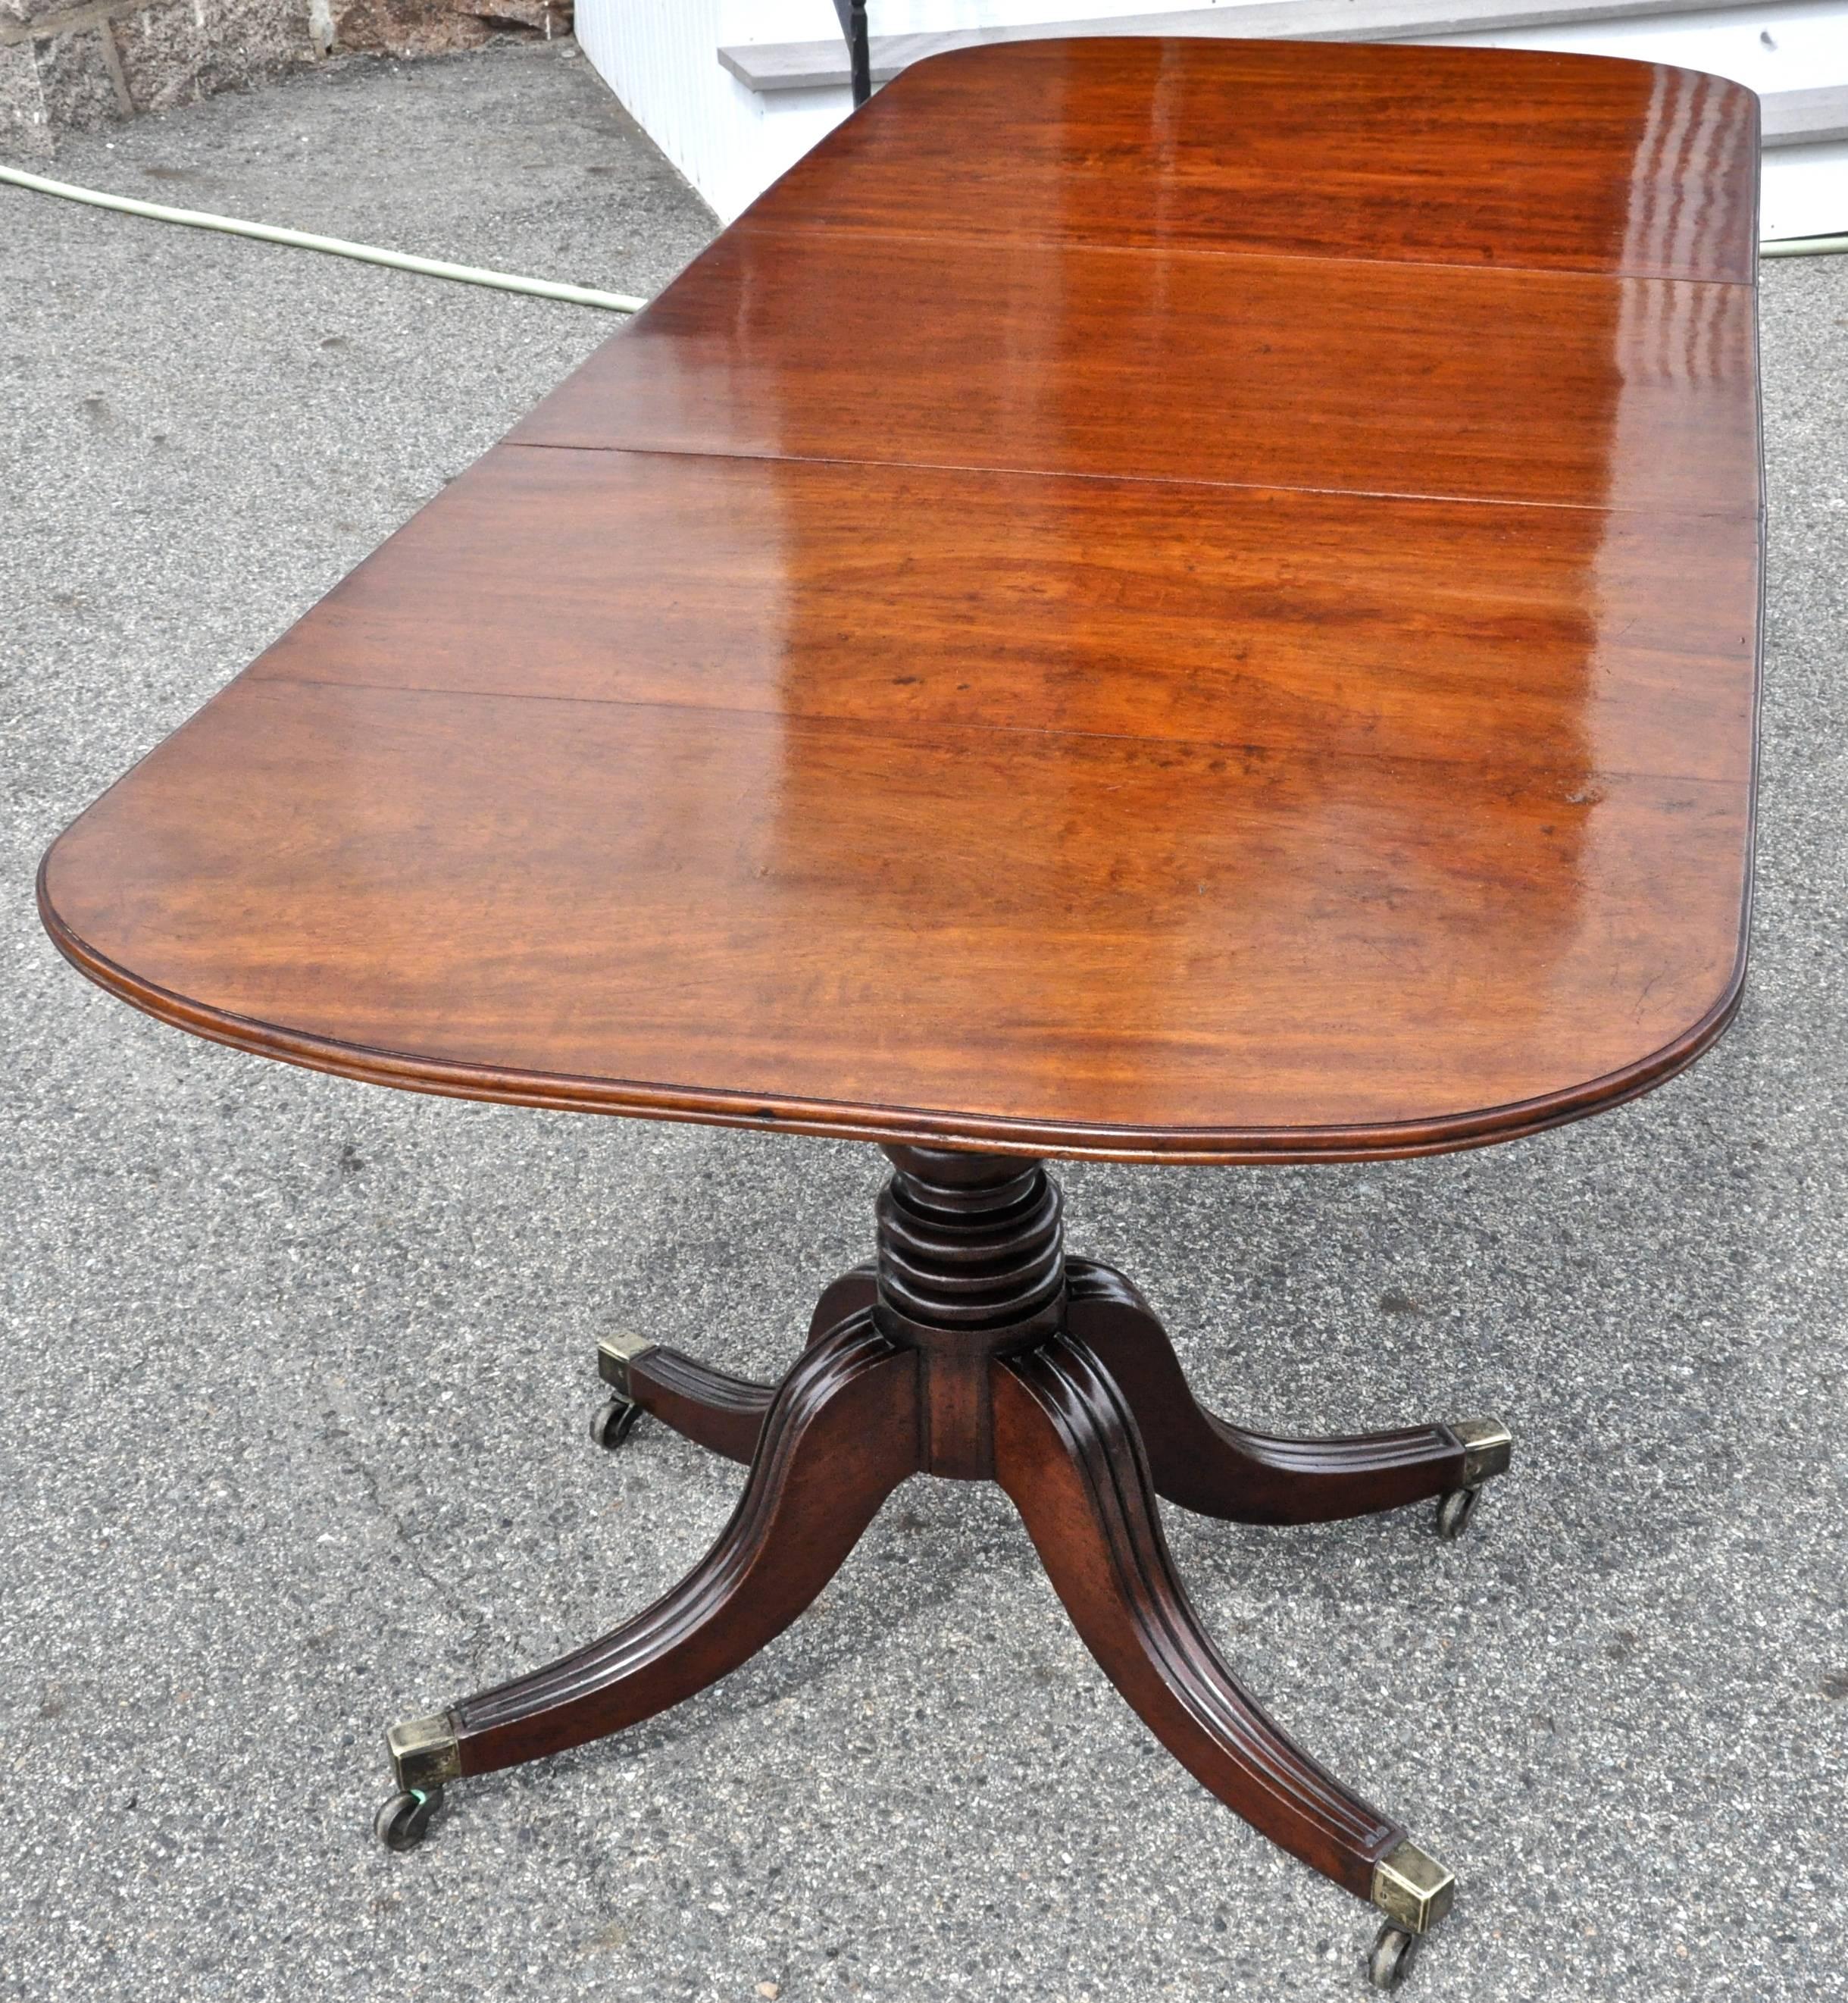 Period early 19th century two pedestal dining table of original narrow width.

Well-turned original pedestals.
Original boards.
Beautiful Cuban plum pudding mahogany throughout.
Original casters.
We are saying English in origin, but could